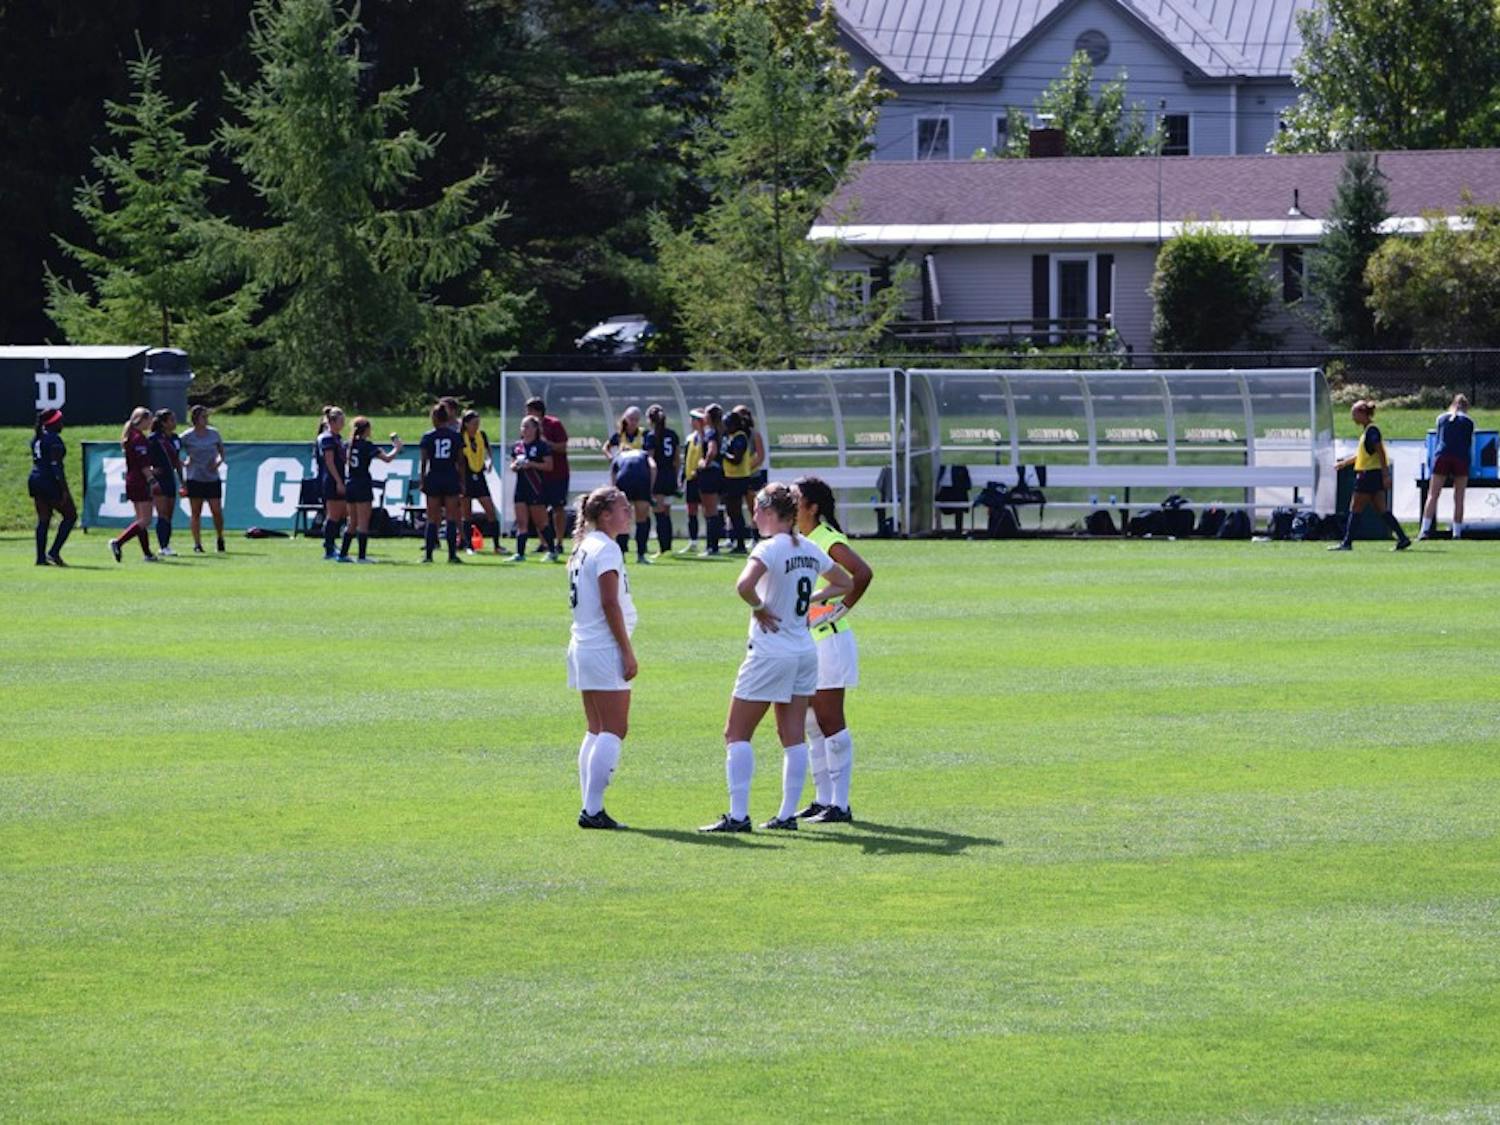 Seven new players make up the incoming class for the Dartmouth women’s soccer team. The new members come from all over North America and feature power players in several positions on the pitch.